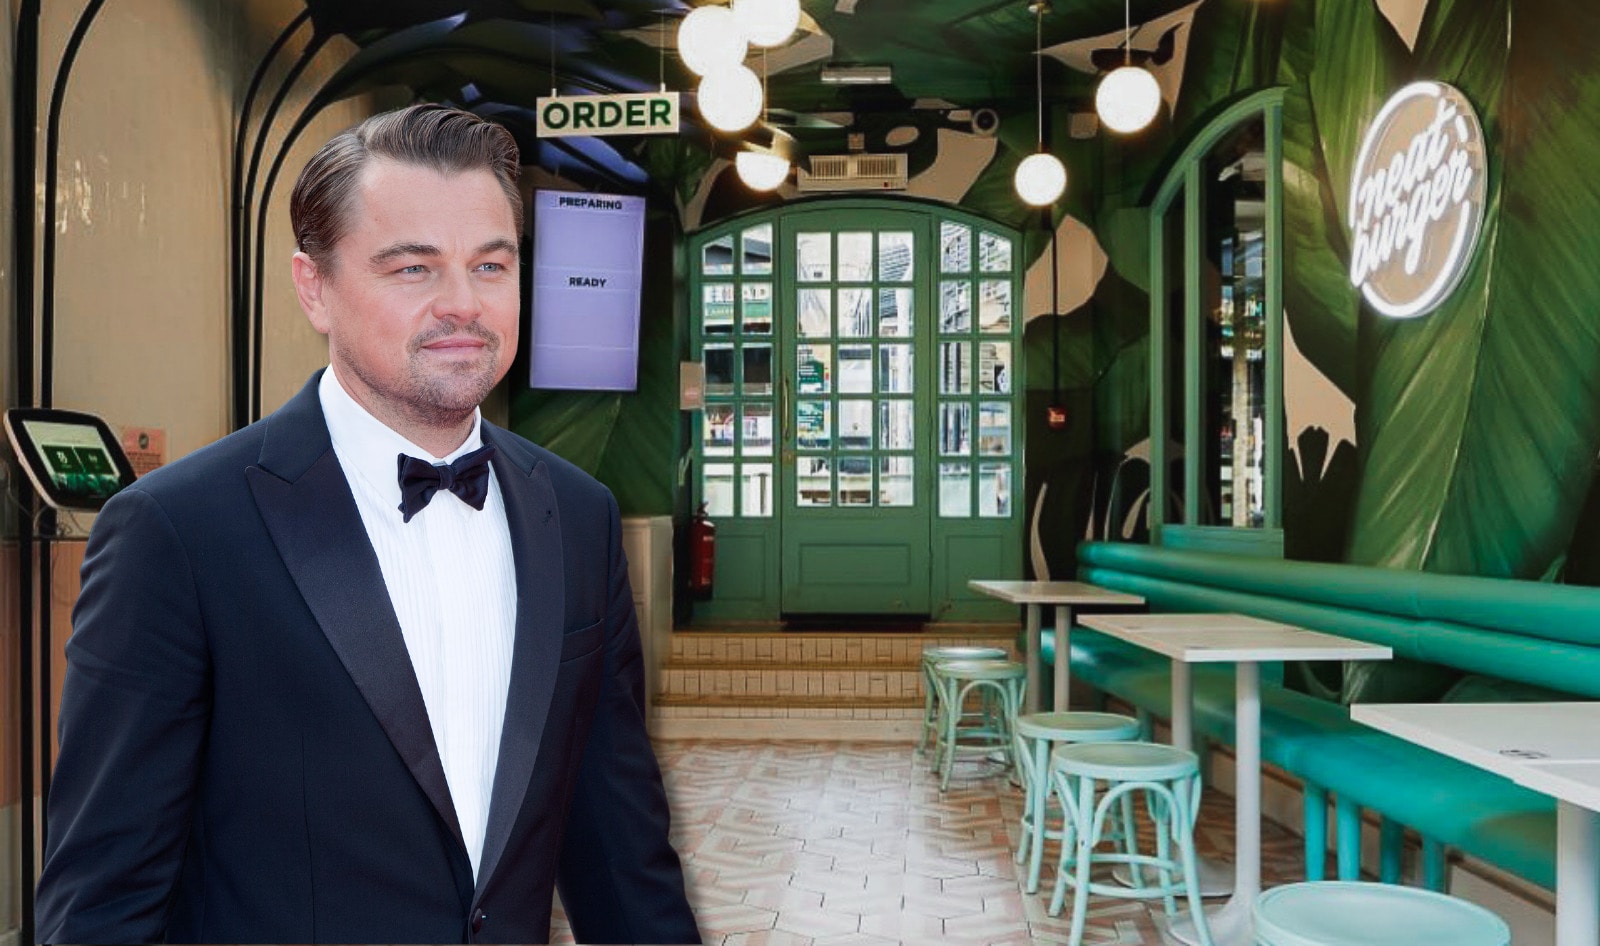 Lewis Hamilton’s Neat Burger Expands to US with Help from Leonardo DiCaprio&nbsp;